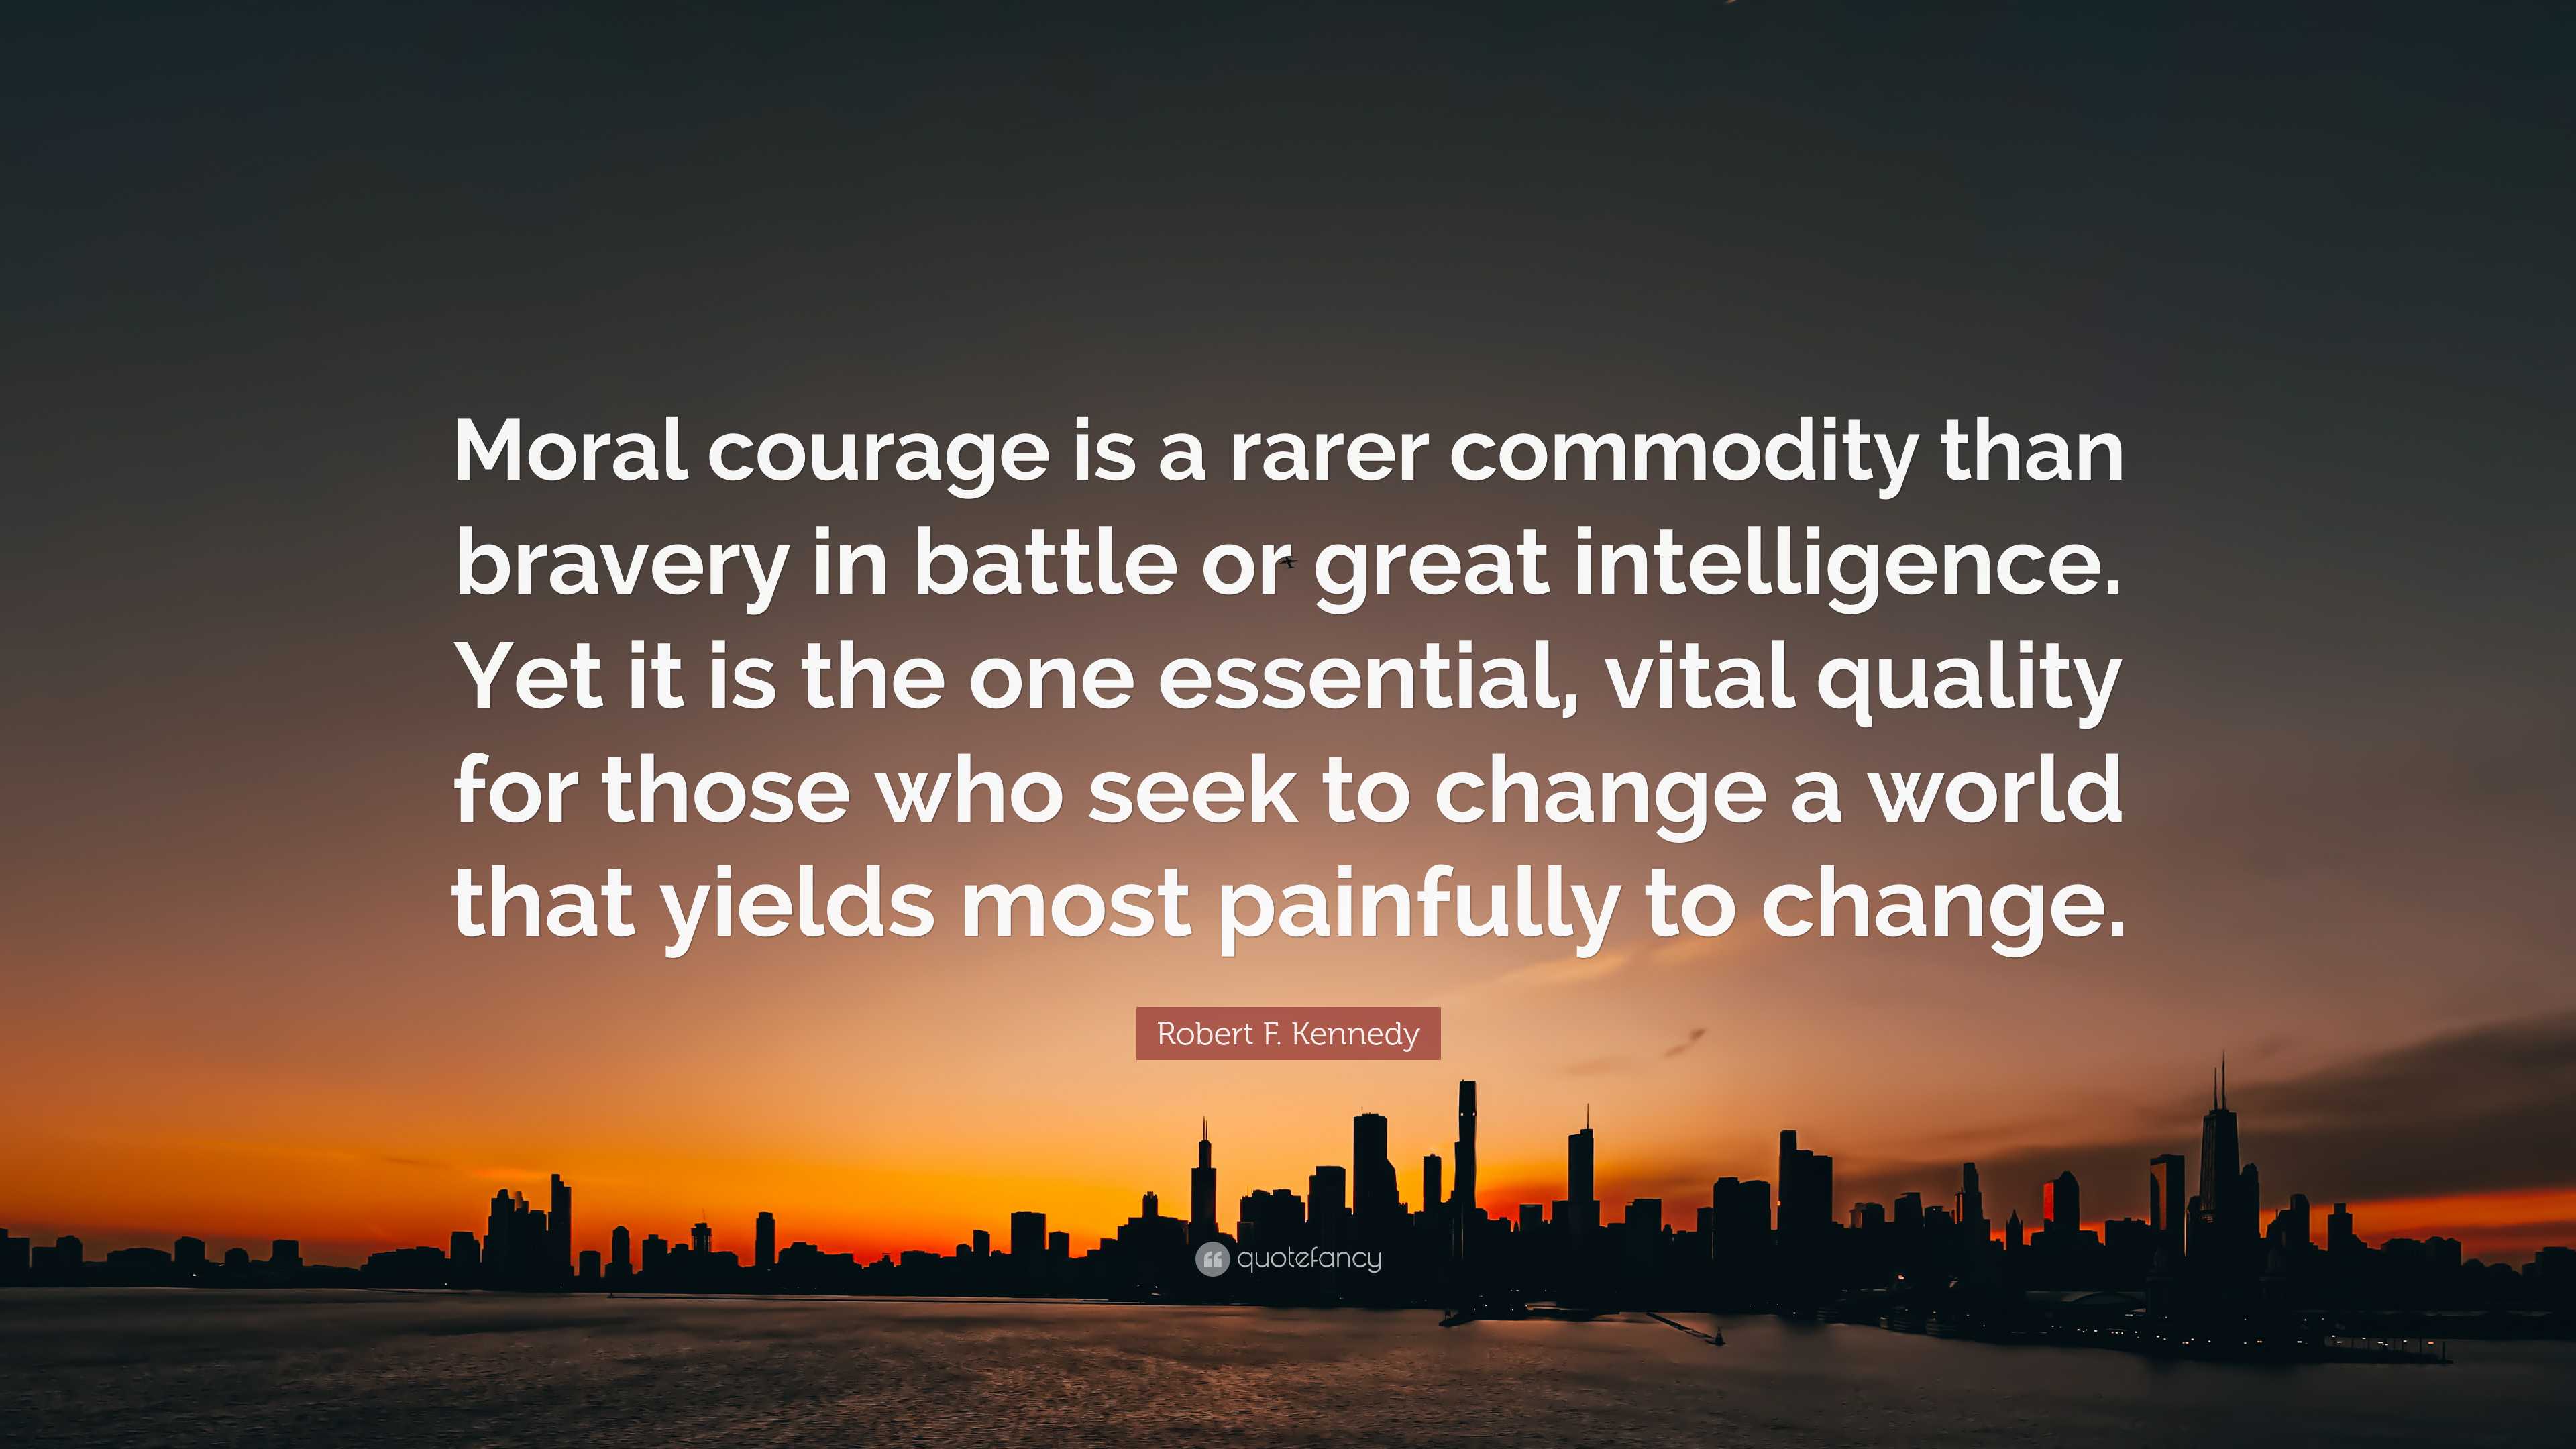 Robert F. Kennedy Quote: “Moral courage is a rarer commodity than bravery  in battle or great intelligence. Yet it is the one essential, vital qual”